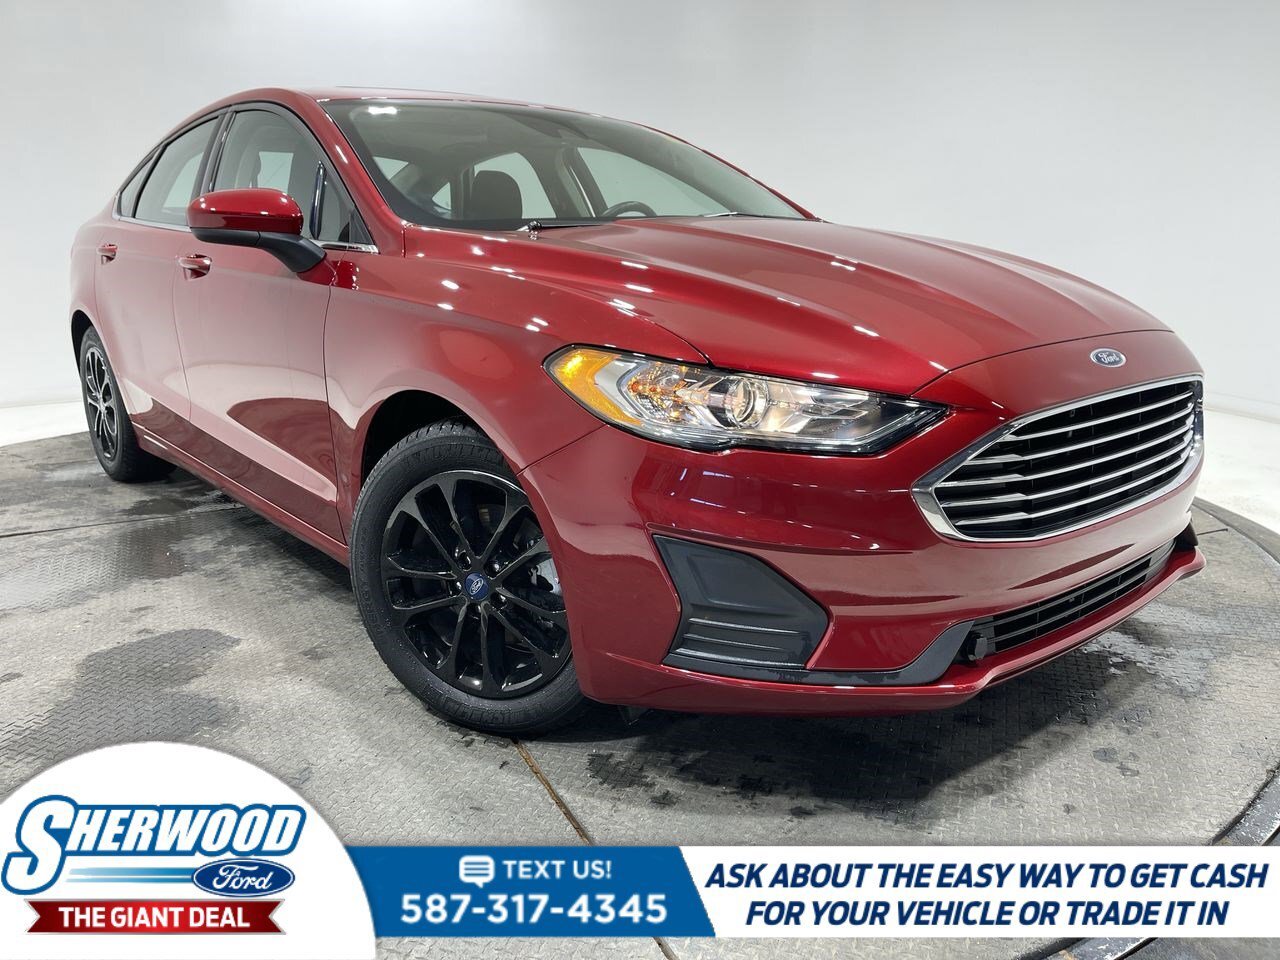 2020 Ford Fusion SE - $0 Down $109 Weekly - LOW KMS - MOONROOF